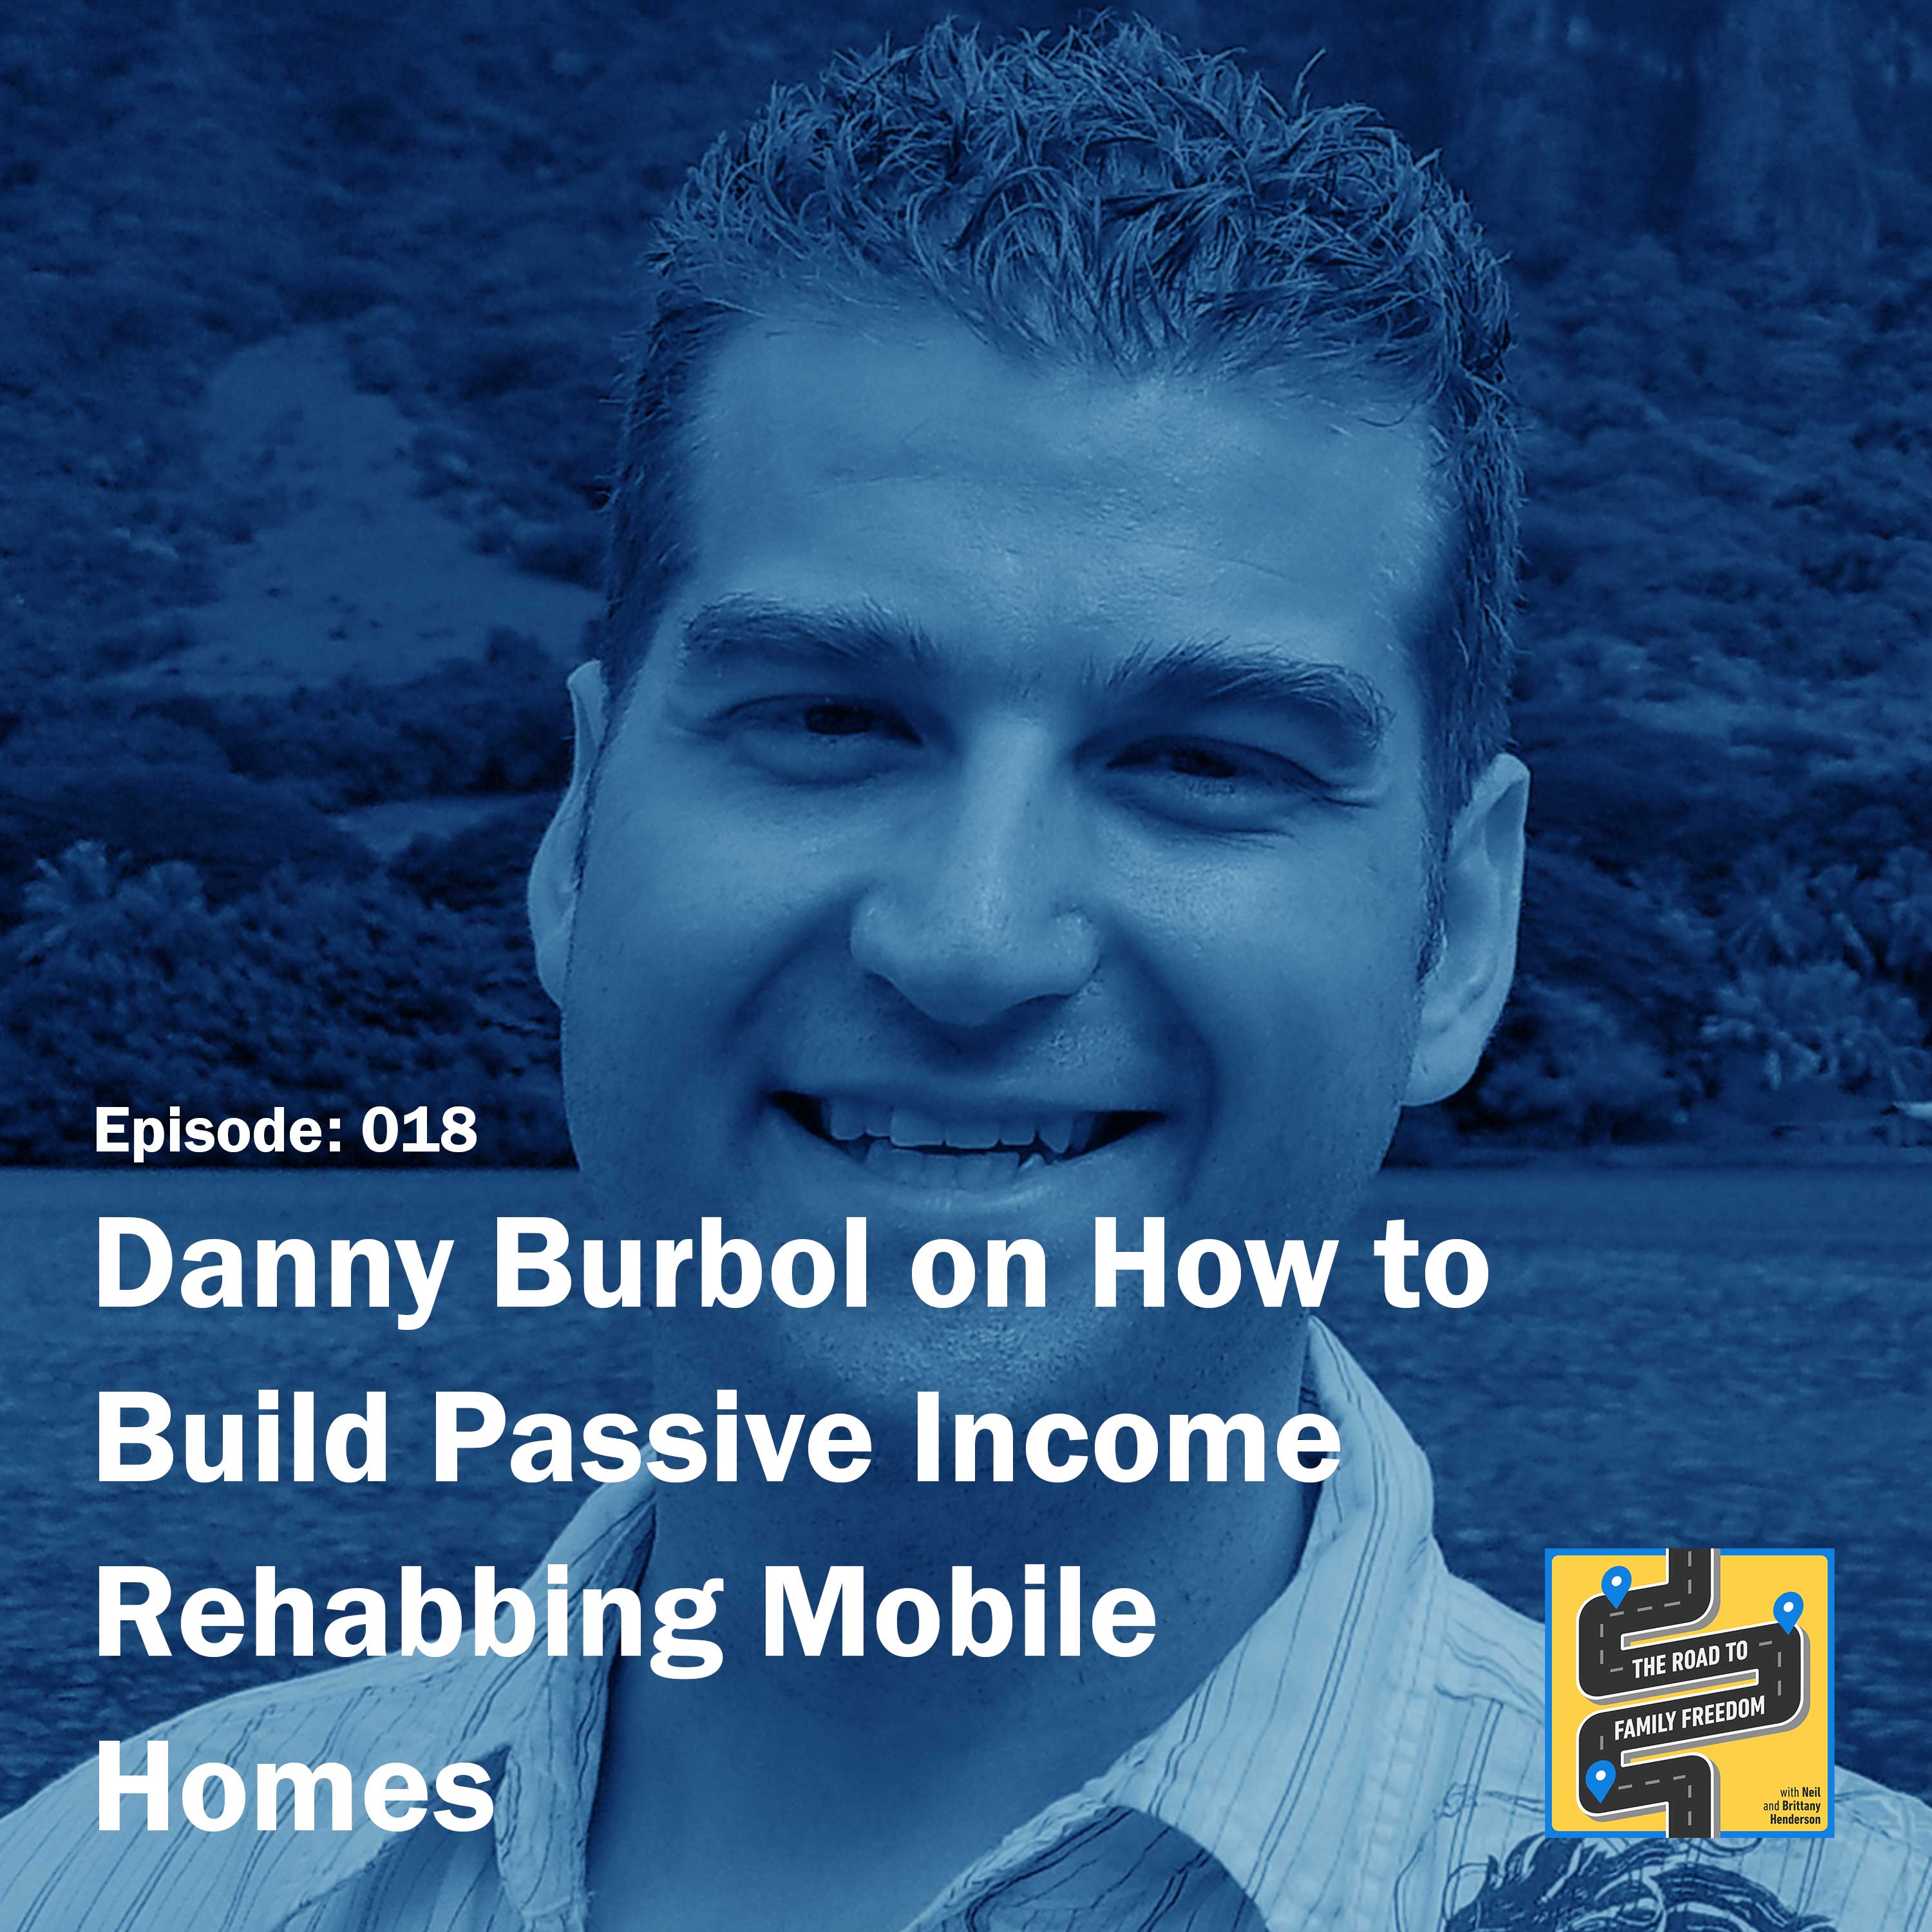 How to Build Passive Income Rehabbing Mobile Homes with Danny Burbol